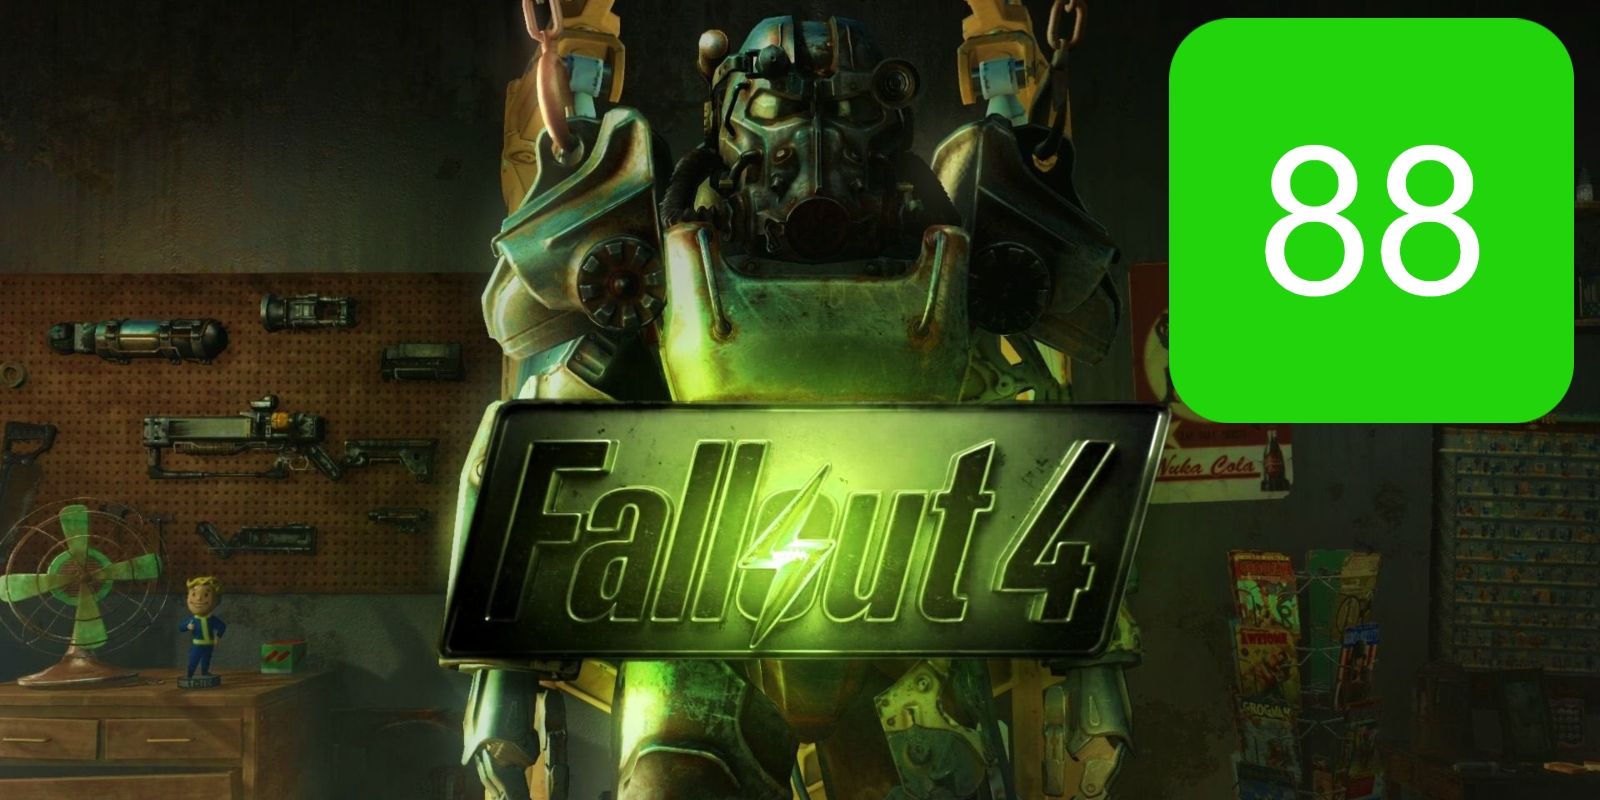 The Xbox One Metascore for Fallout 4